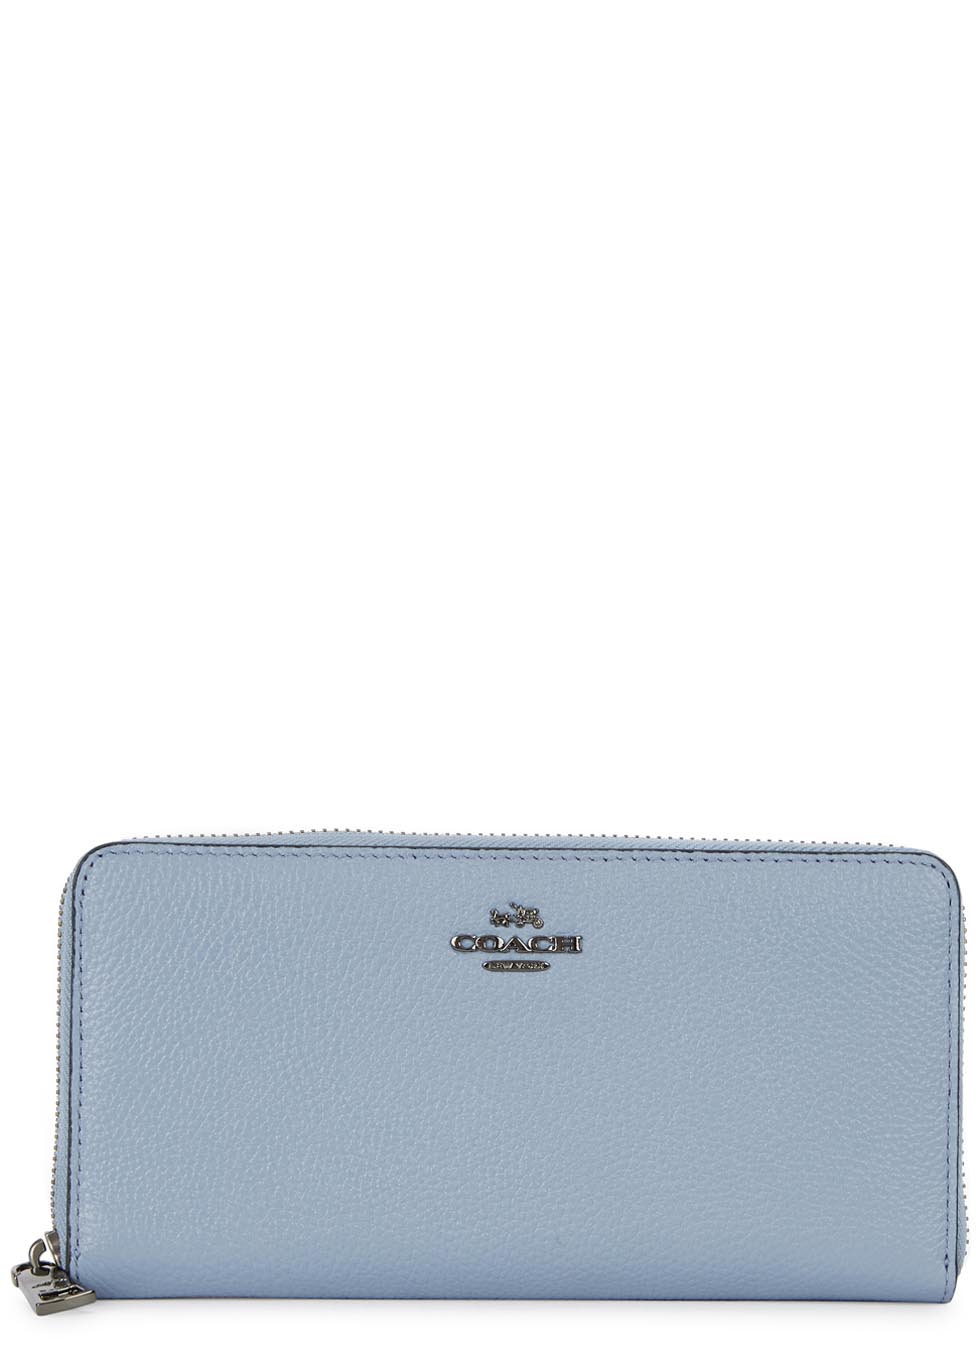 Coach Accordian Light Blue Leather Wallet in Blue | Lyst